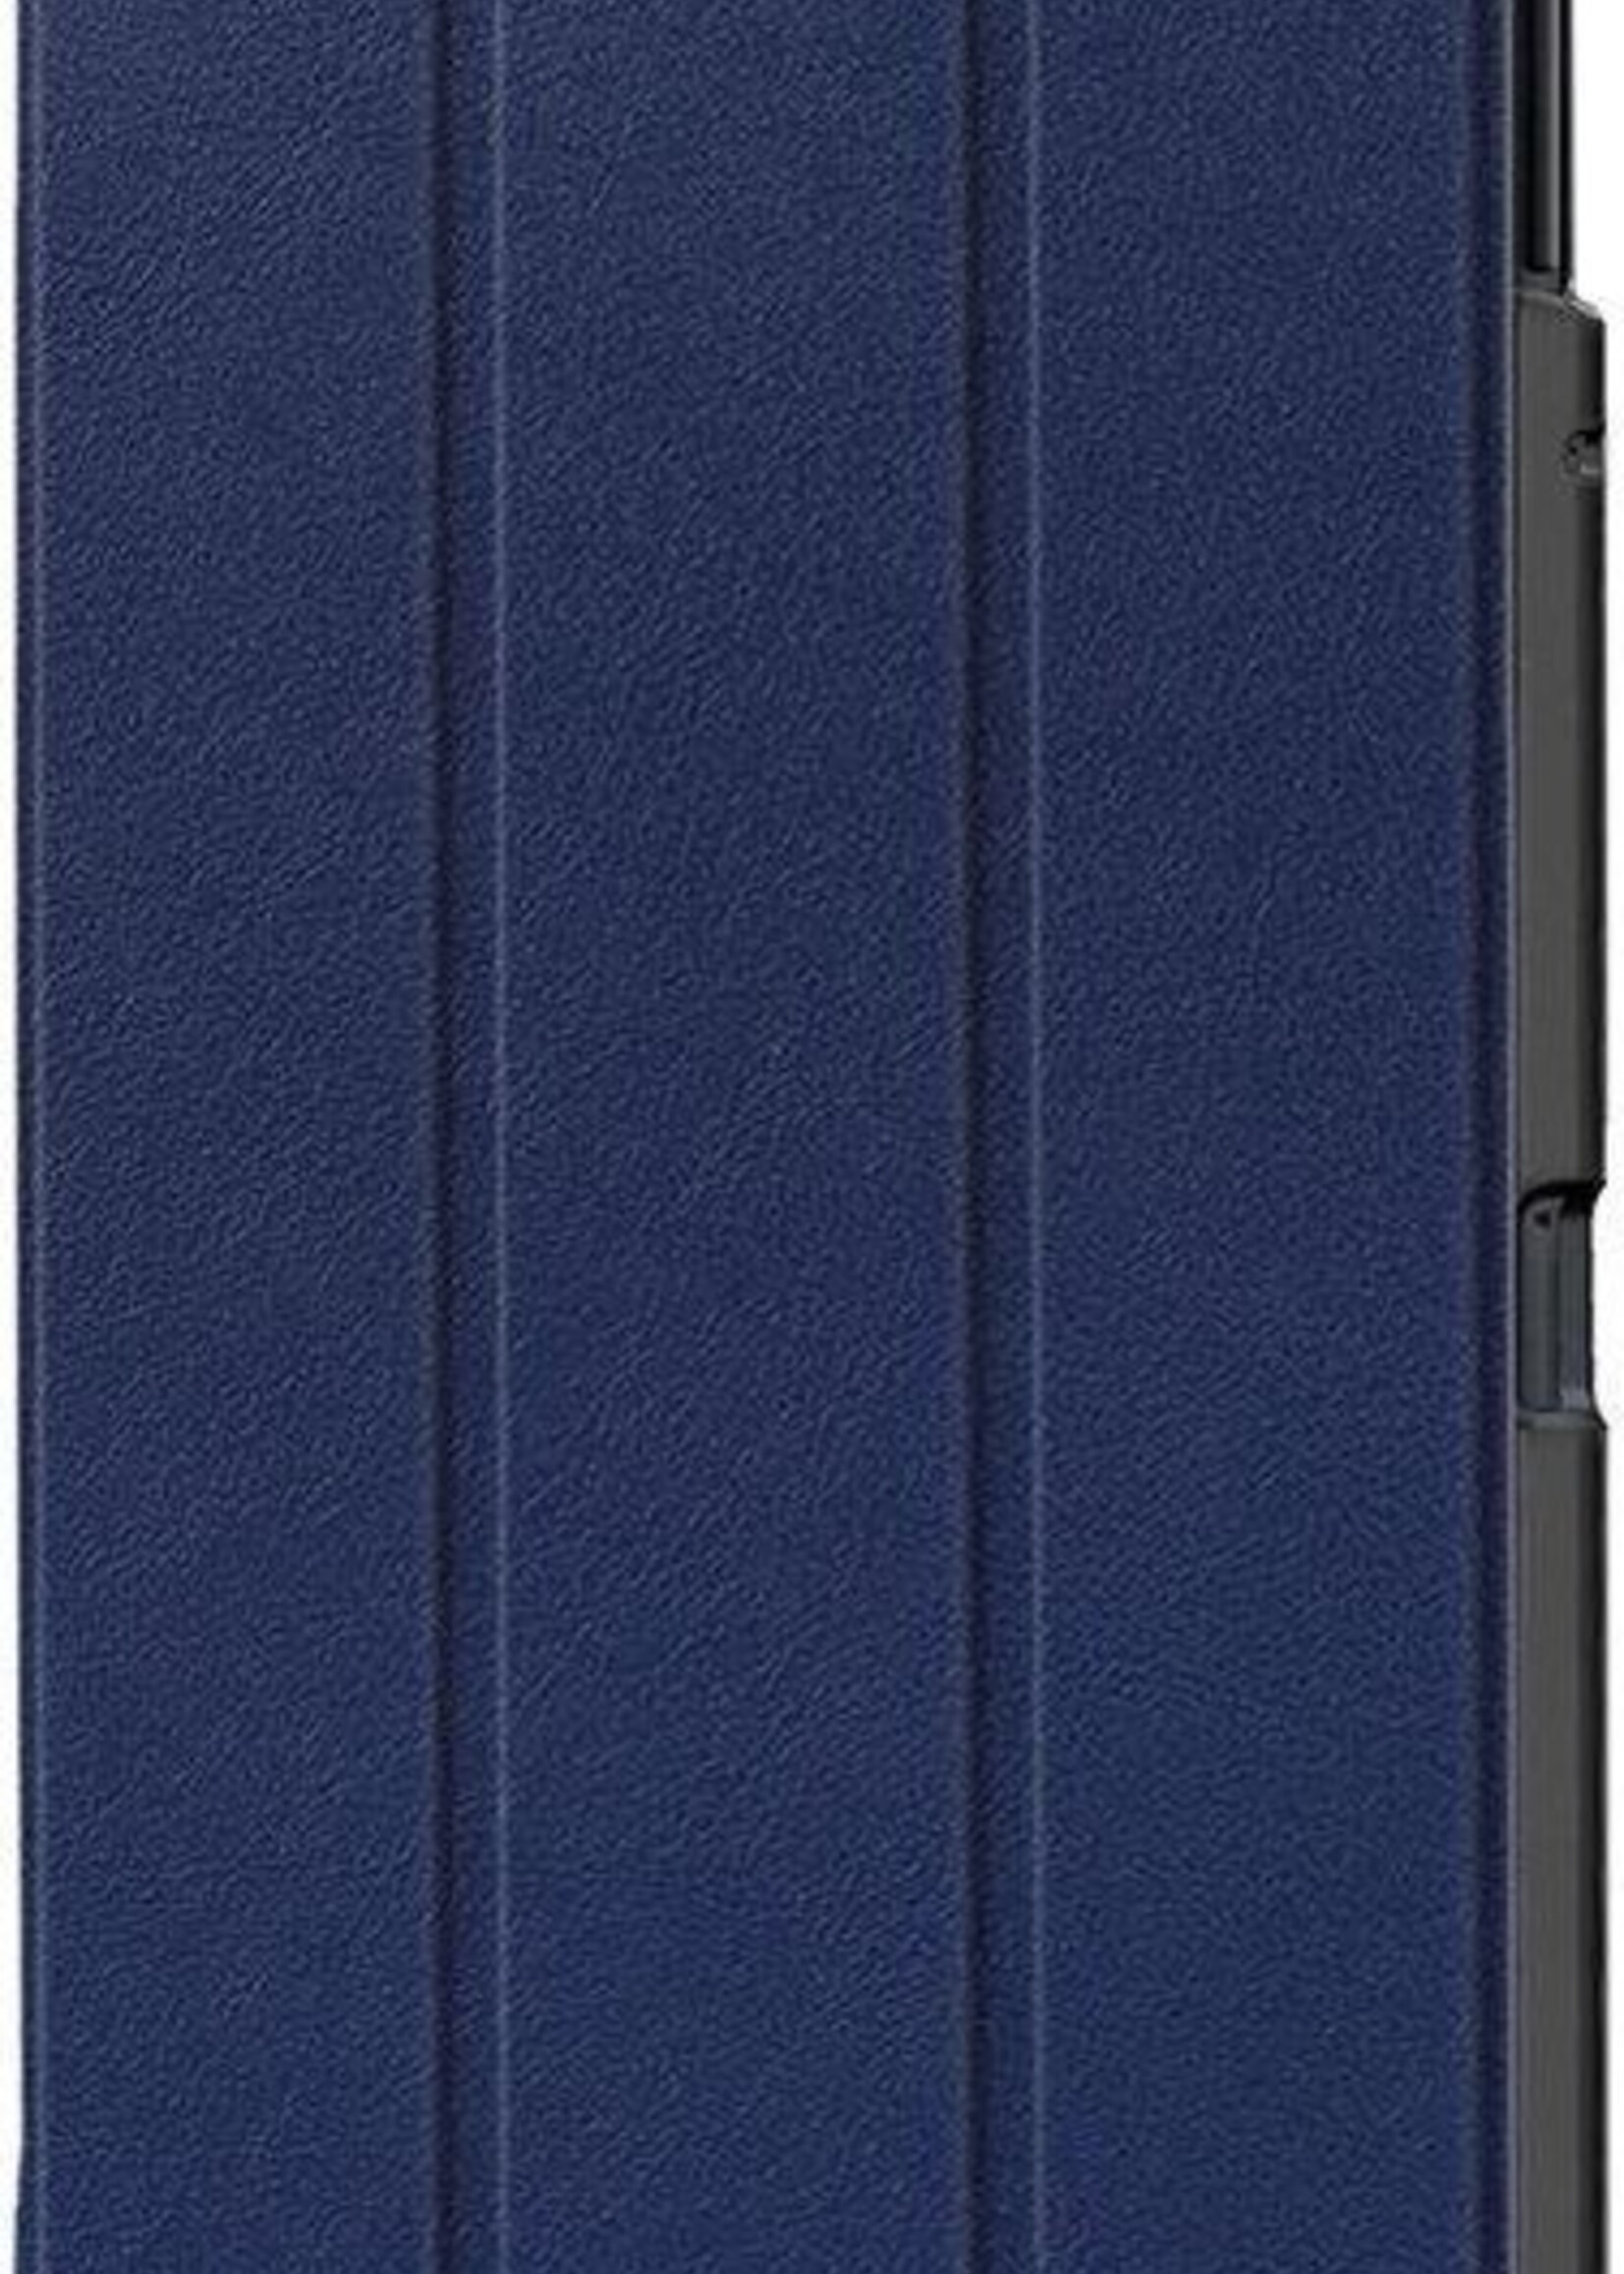 BTH Hoes Geschikt voor Samsung Galaxy Tab A 10.5 2018 Hoes Book Case Hoesje Trifold Cover - Hoesje Geschikt voor Samsung Tab A 10.5 2018 Hoesje Bookcase - Blauw